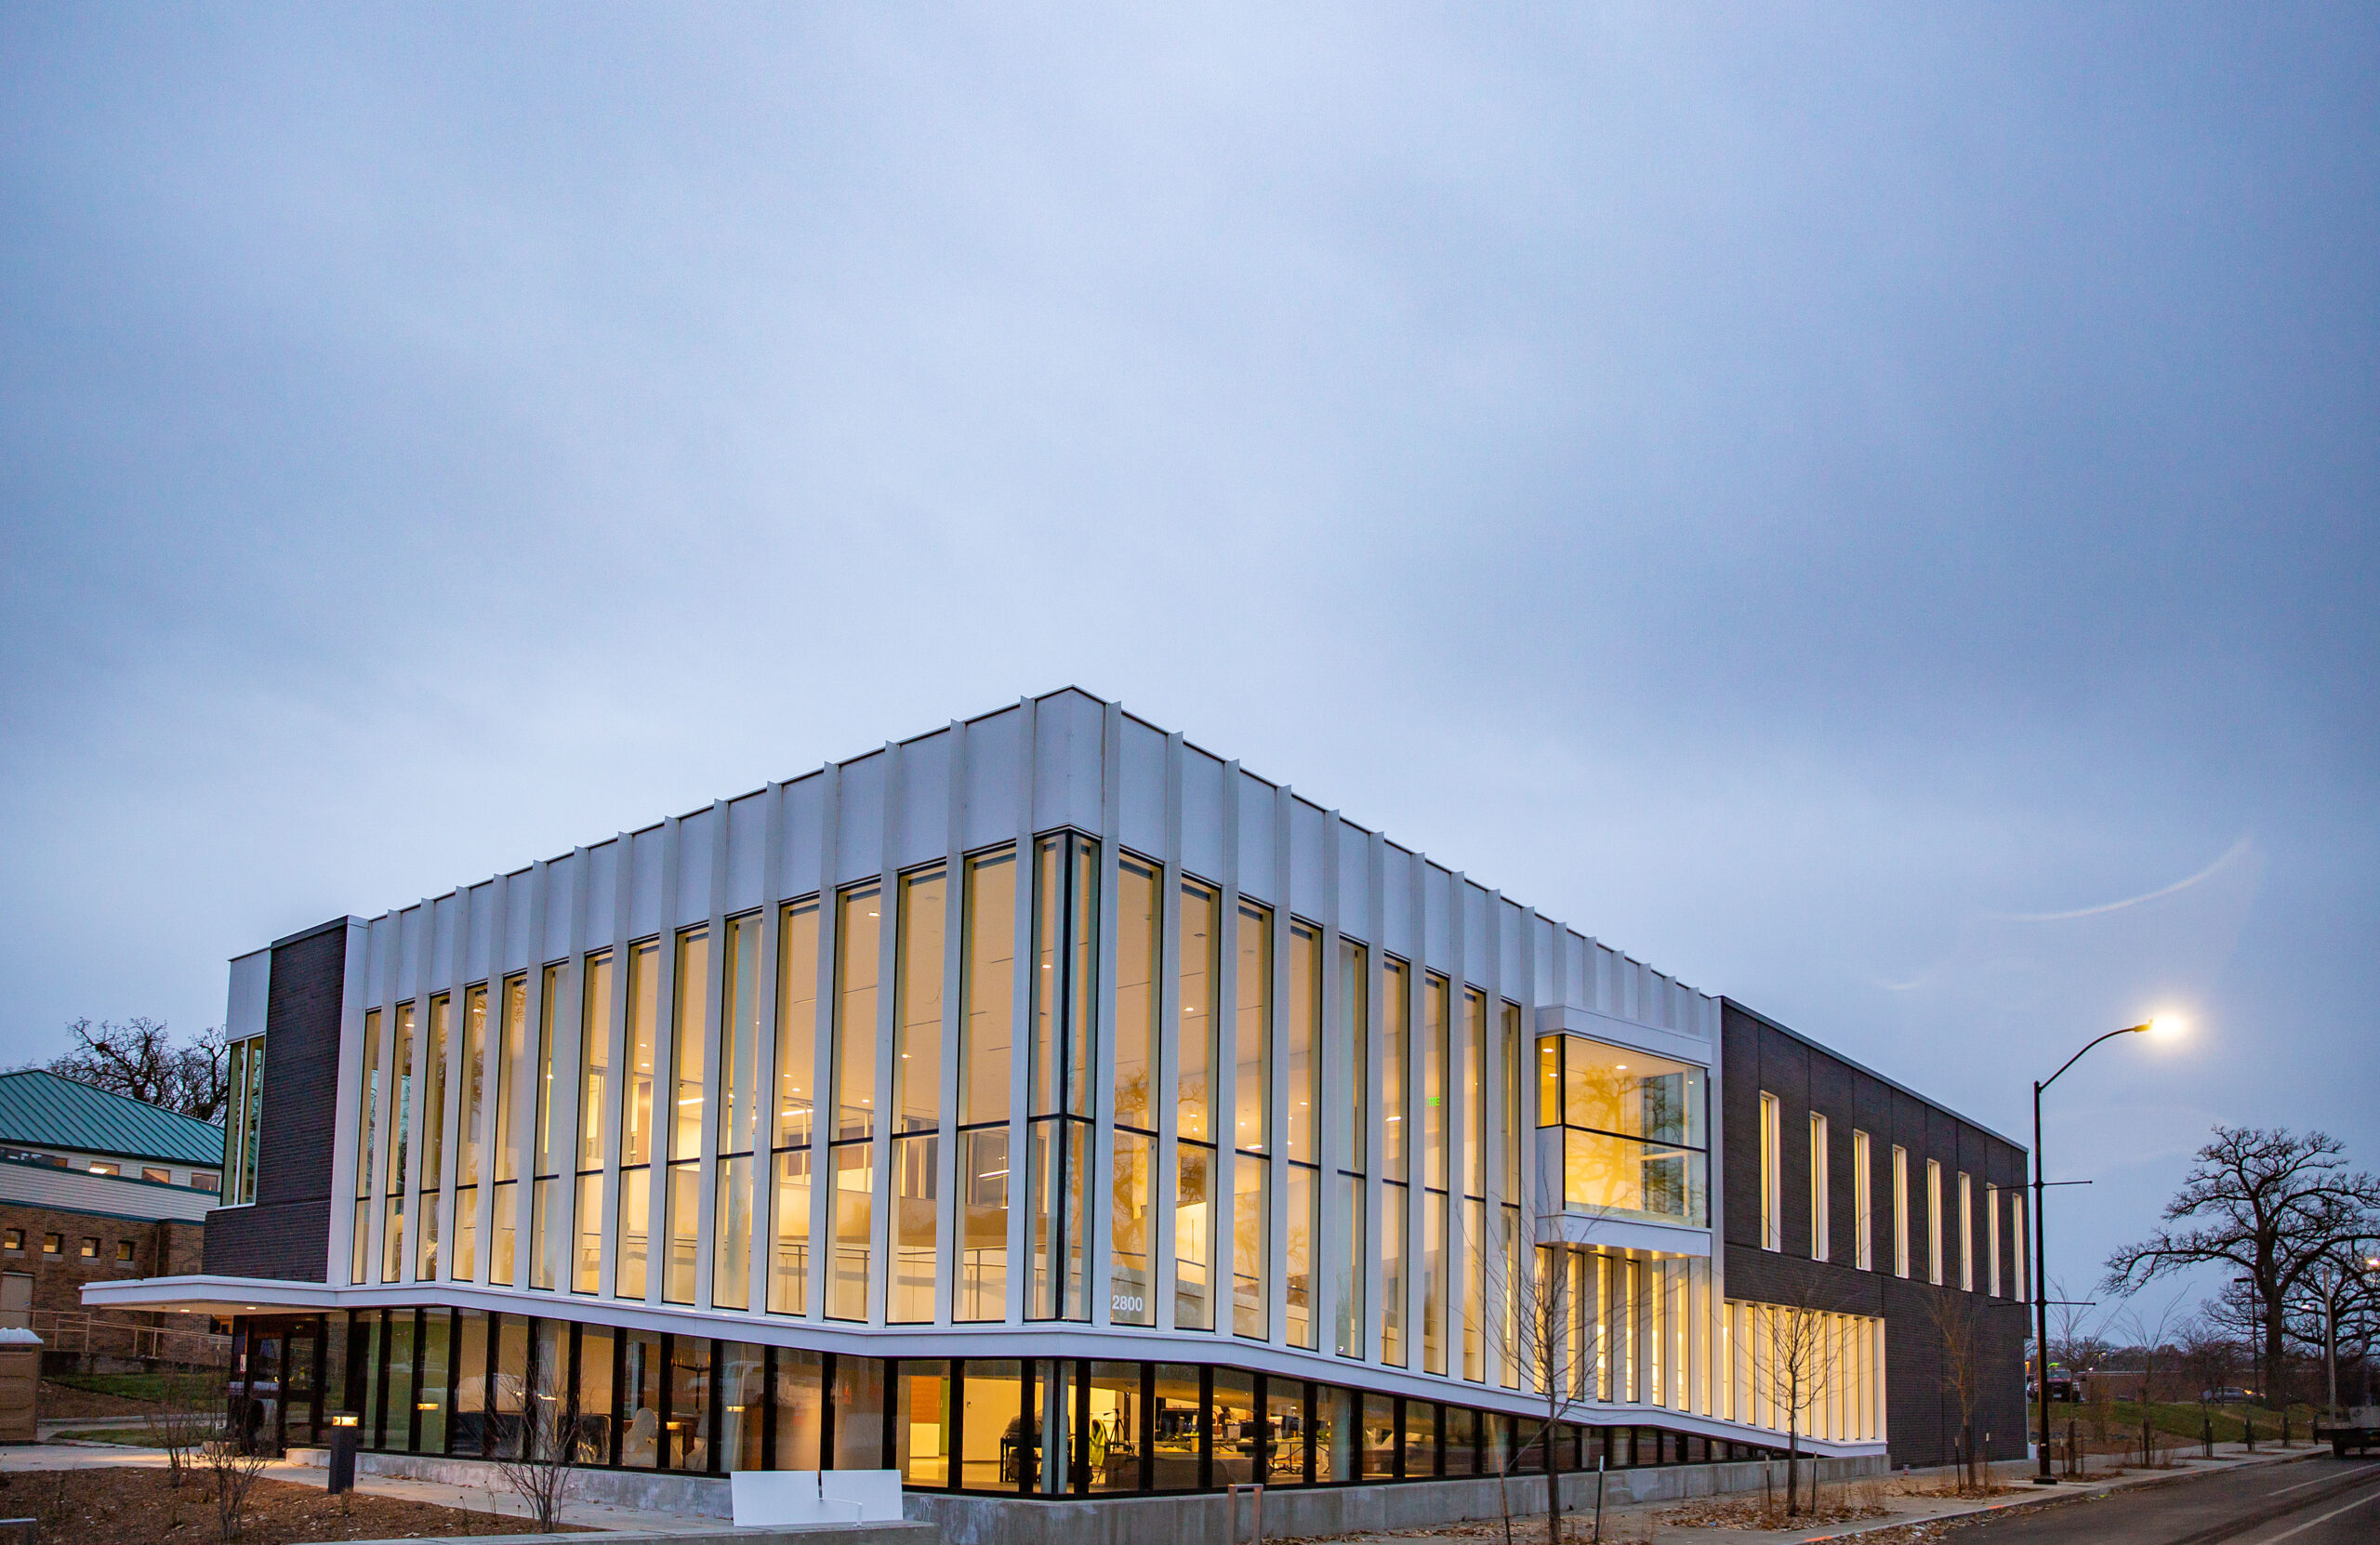 The new Harkin Institute building at dusk. Light shines through the two-story windows and the two-story ramp can be seen through the window.